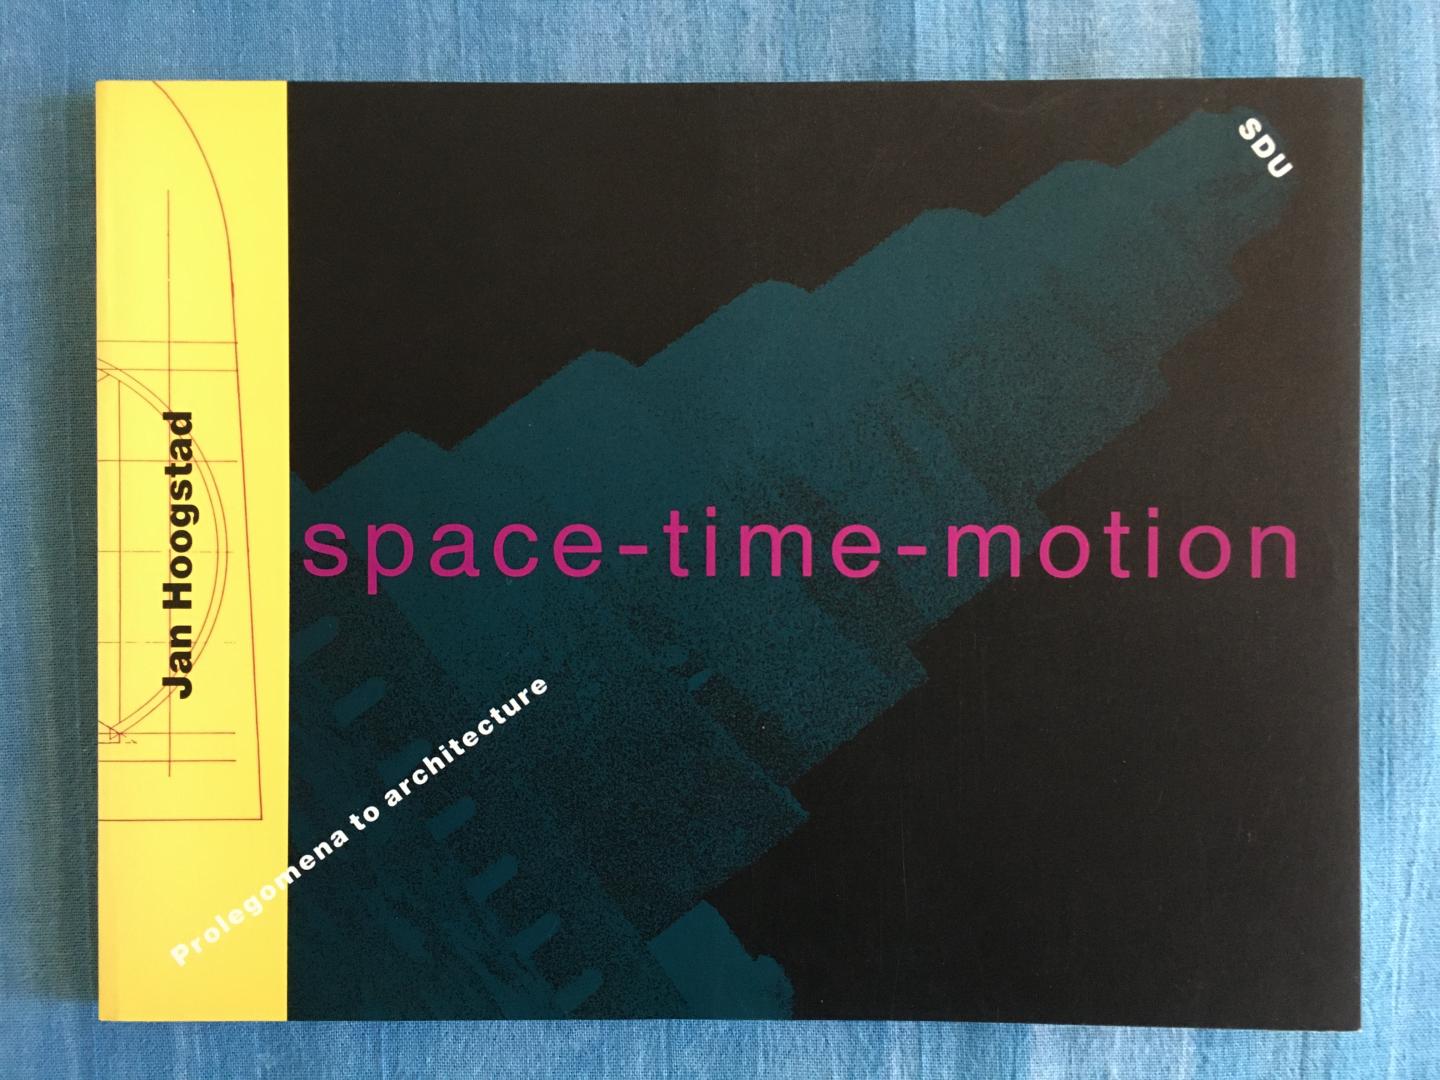 Hoogstad, Jan - Space-time-motion. Prolegomena to architecture.